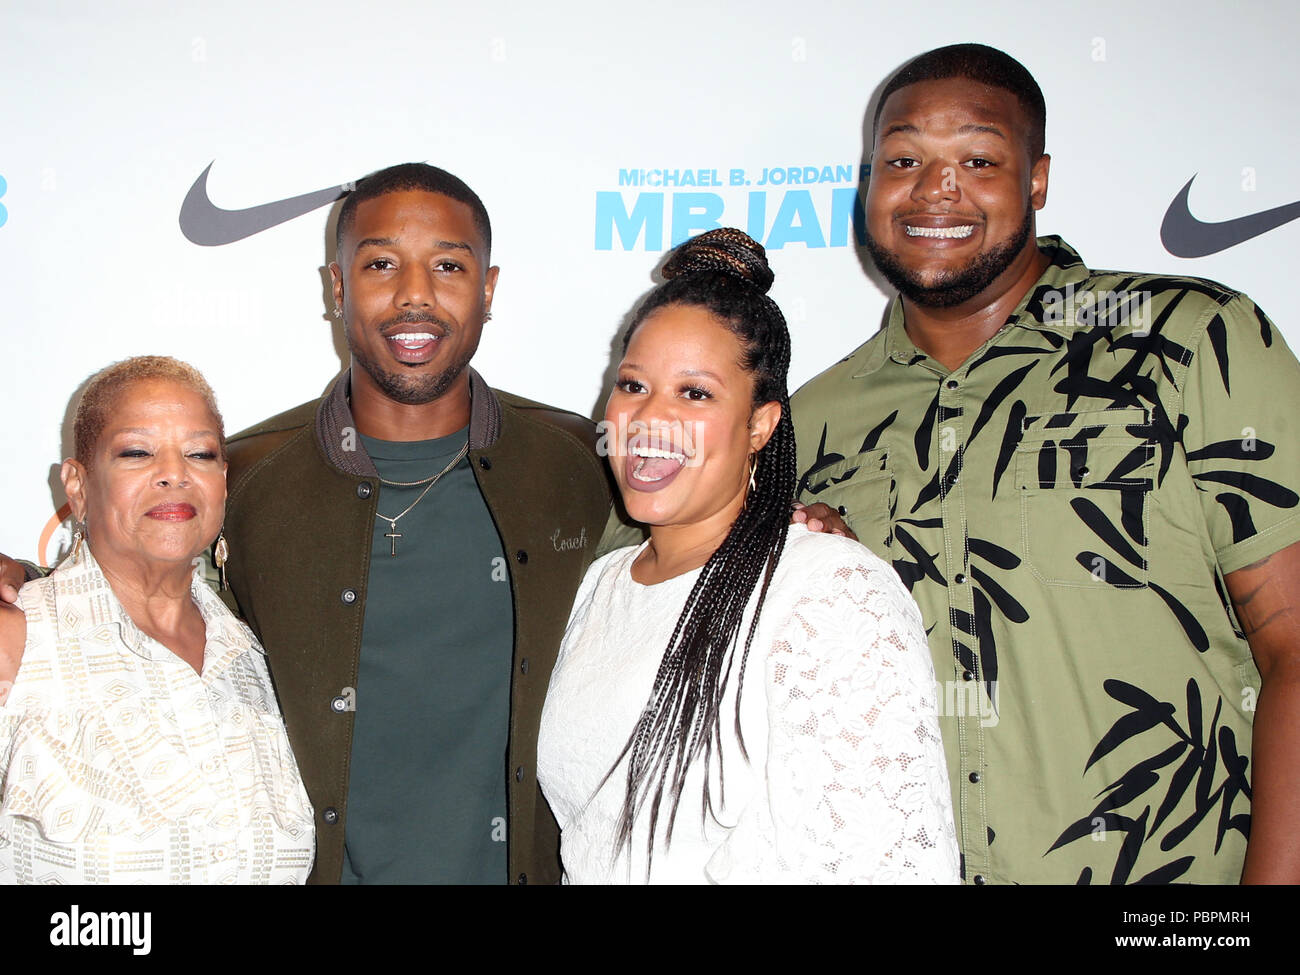 Hollywood, California, 28th July, 2018. Michael A. Jordan, Donna Jordan,  Michael B. Jordan, Khalid Jordan, Jamila Jordan, at Michael B. Jordan And  Lupus LA Present 2nd Annual MBJAM18 at Dave & Buster's